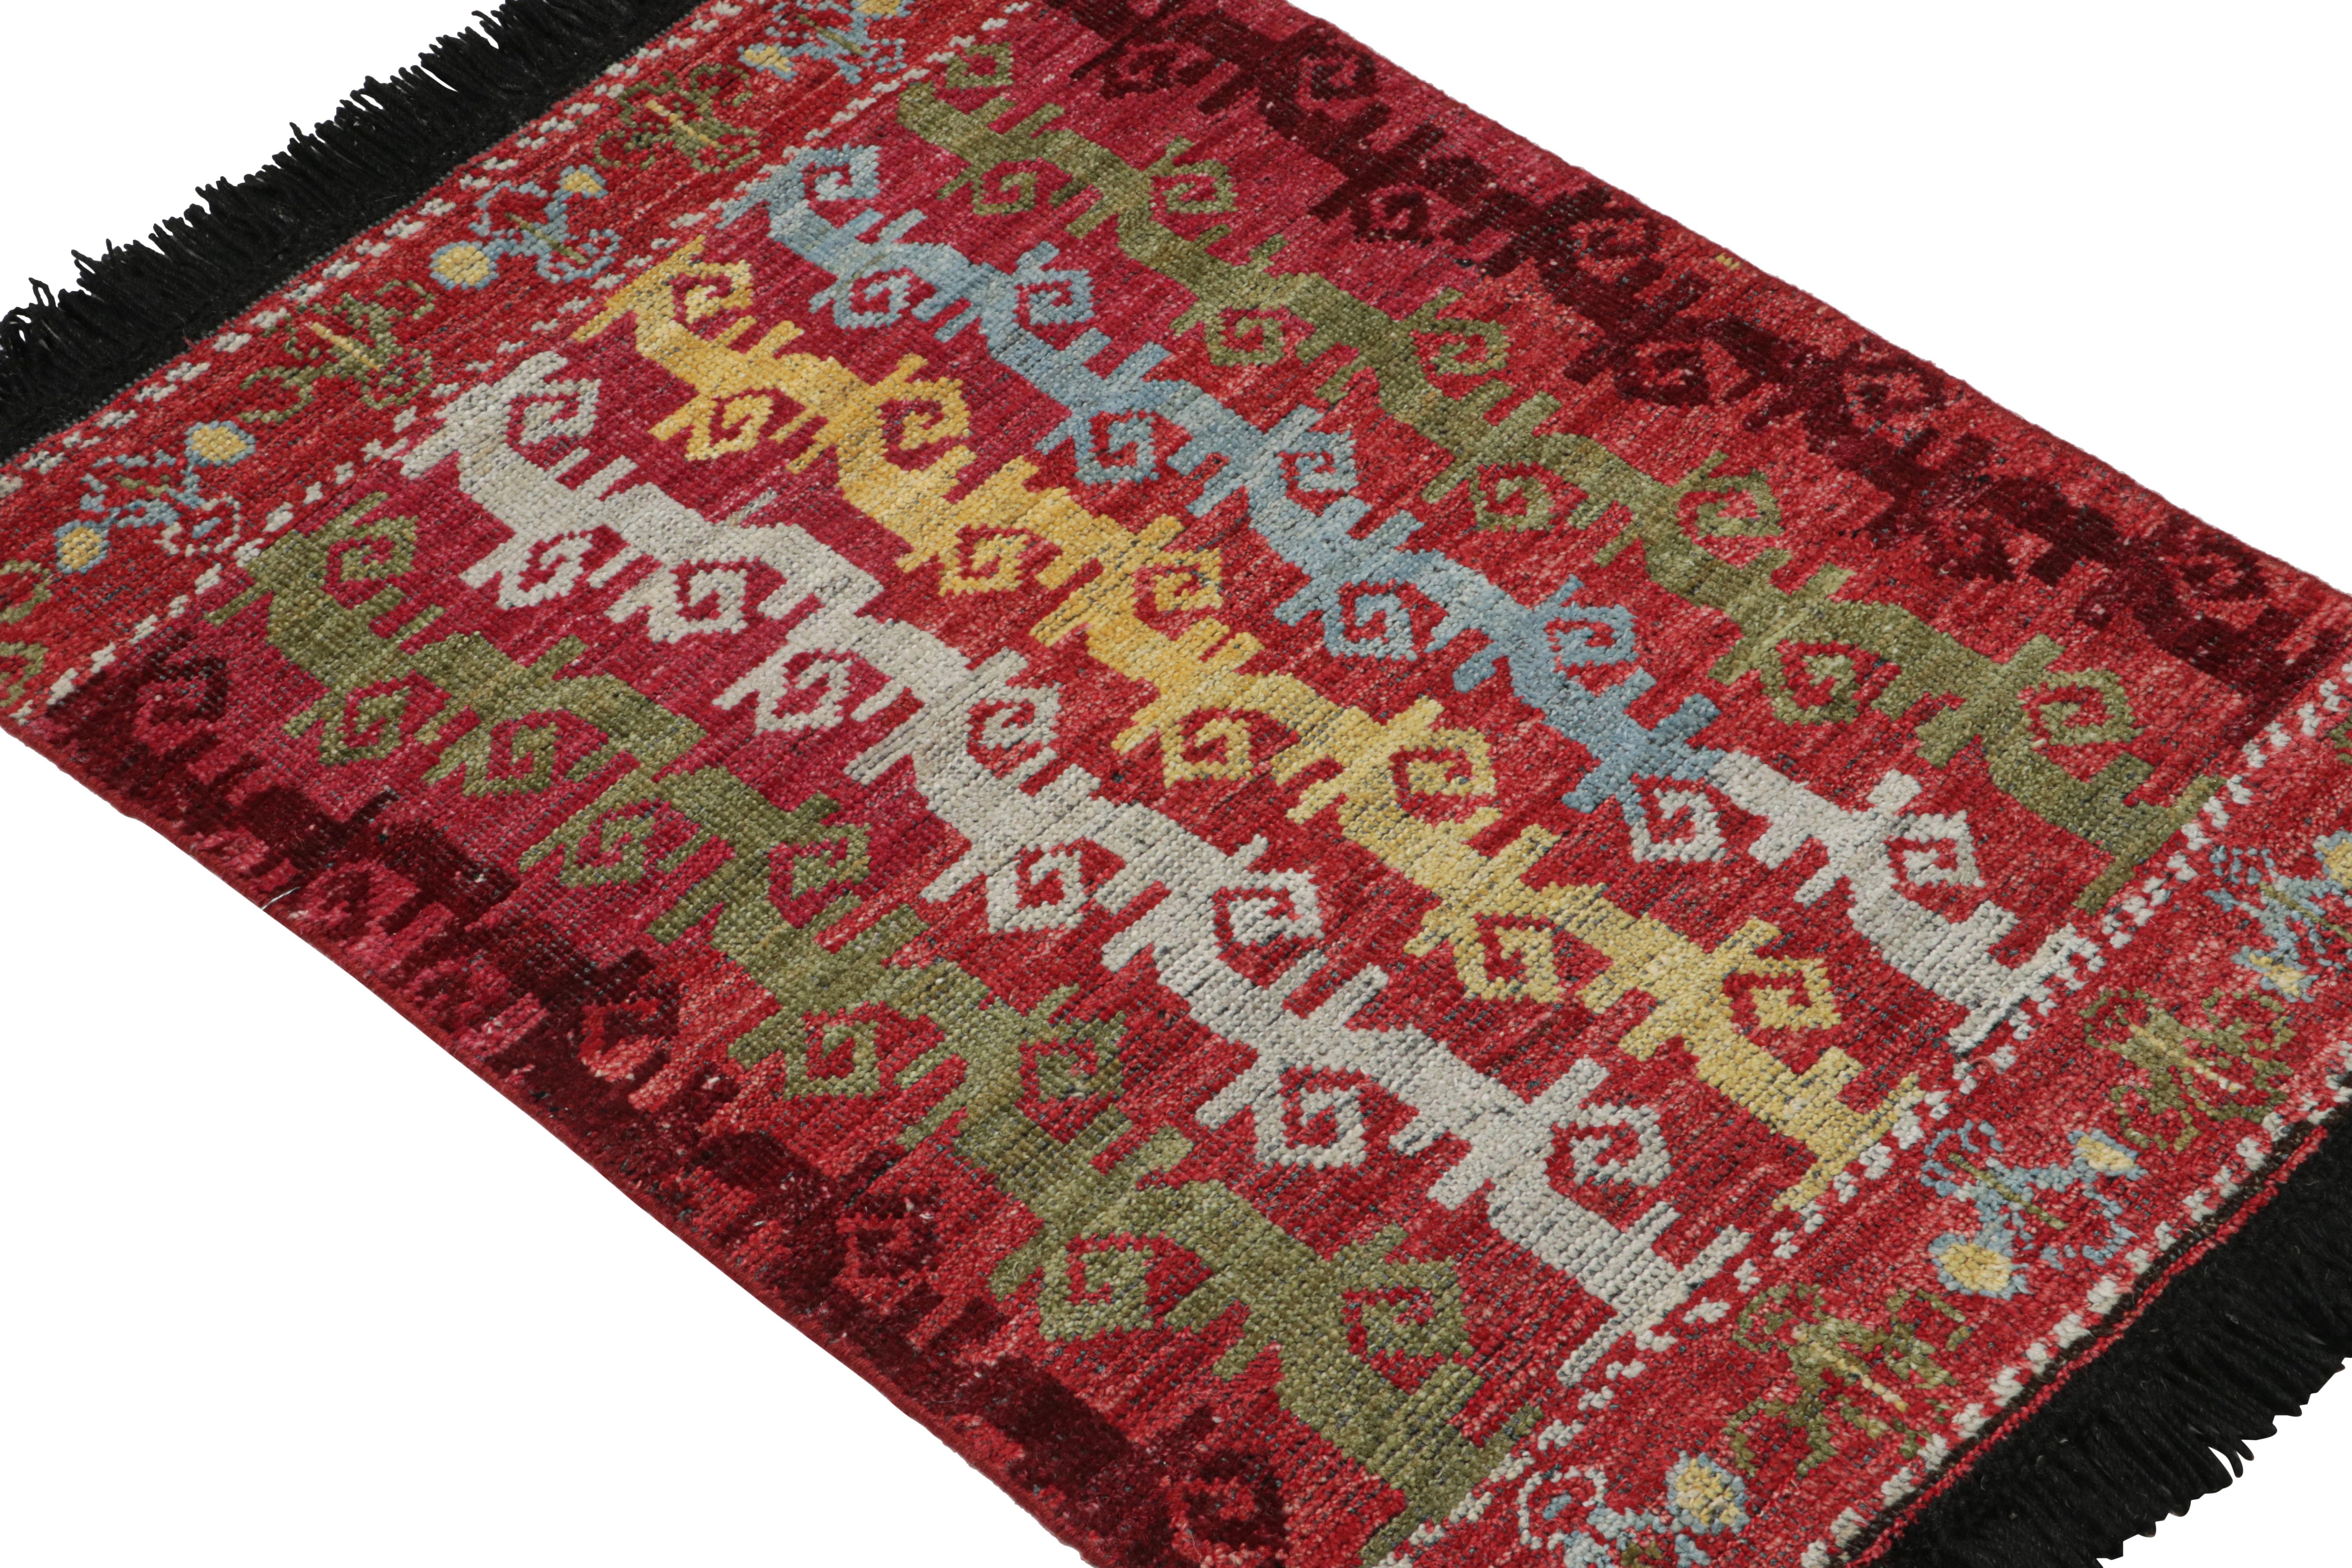 Inspired by antique tribal rugs and Caucasian pieces with vine scroll patterns, like those depicted in the field against warm, coral red undertones, this 2x3 rug from our Burano collection is hand knotted in wool. 

On the Design: 

The field